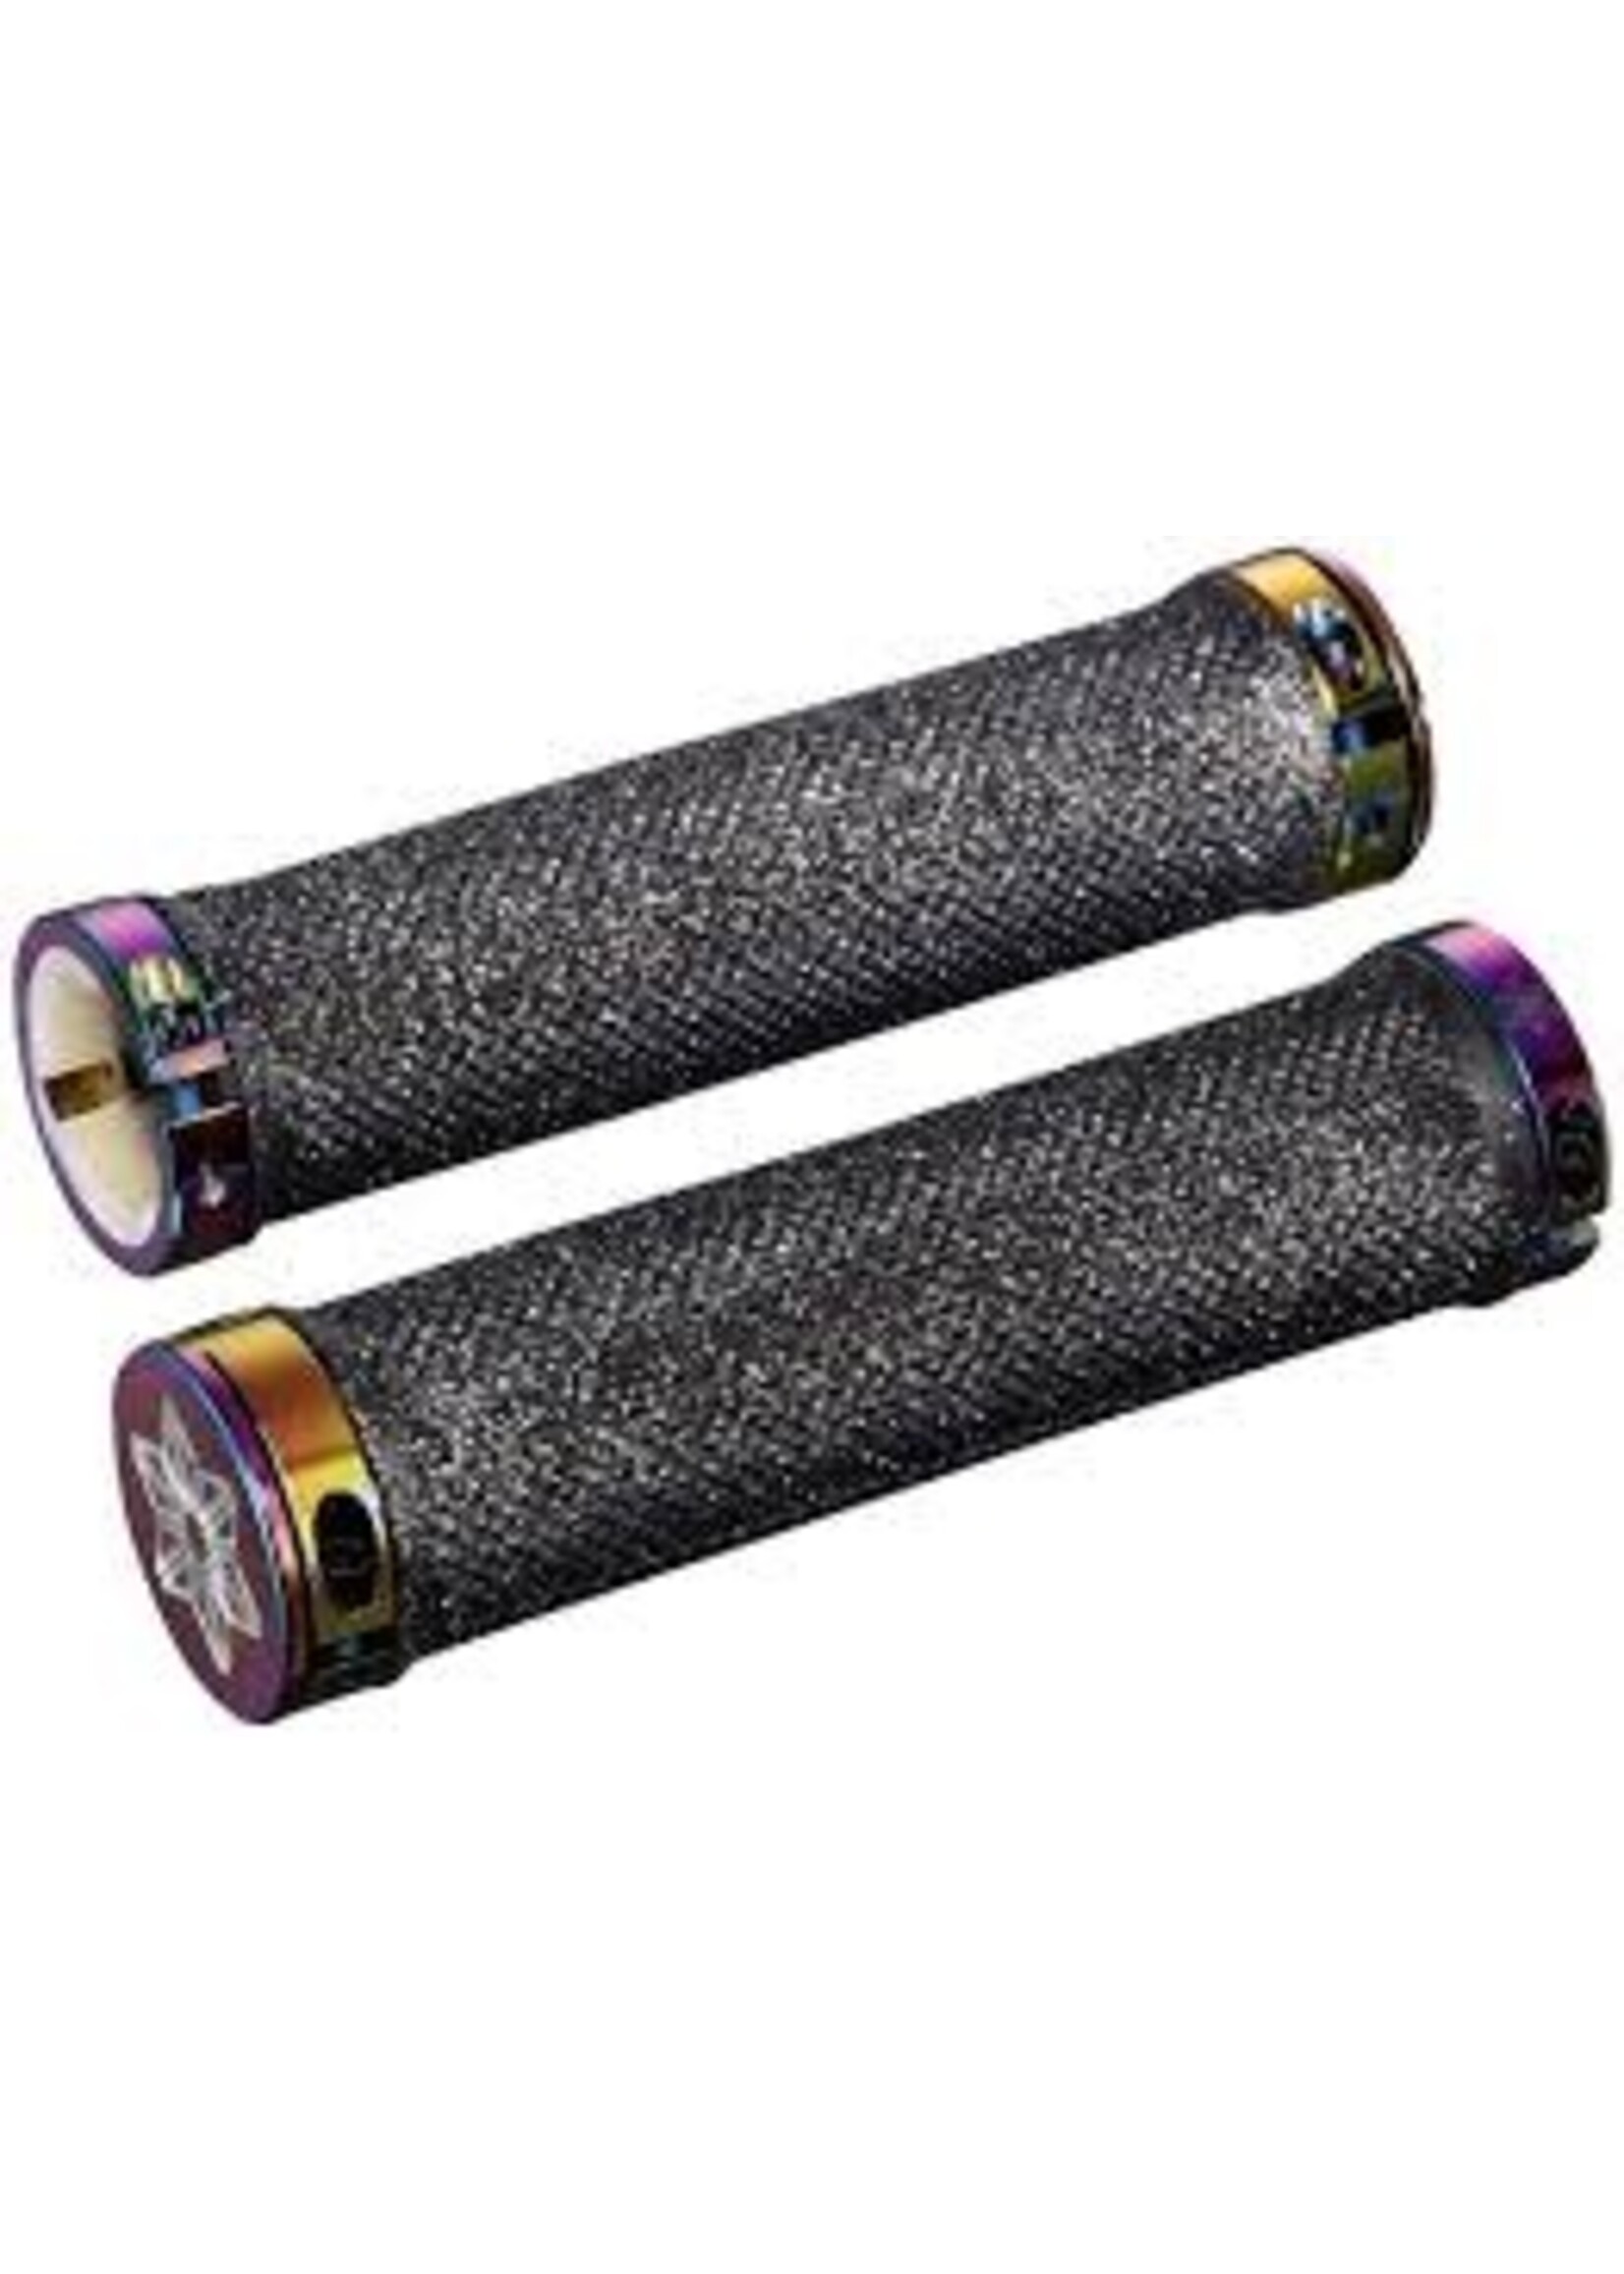 Specialized DIAMOND KUSH GRIP BLK/OIL SLICK DH STAR RINGZ One Size